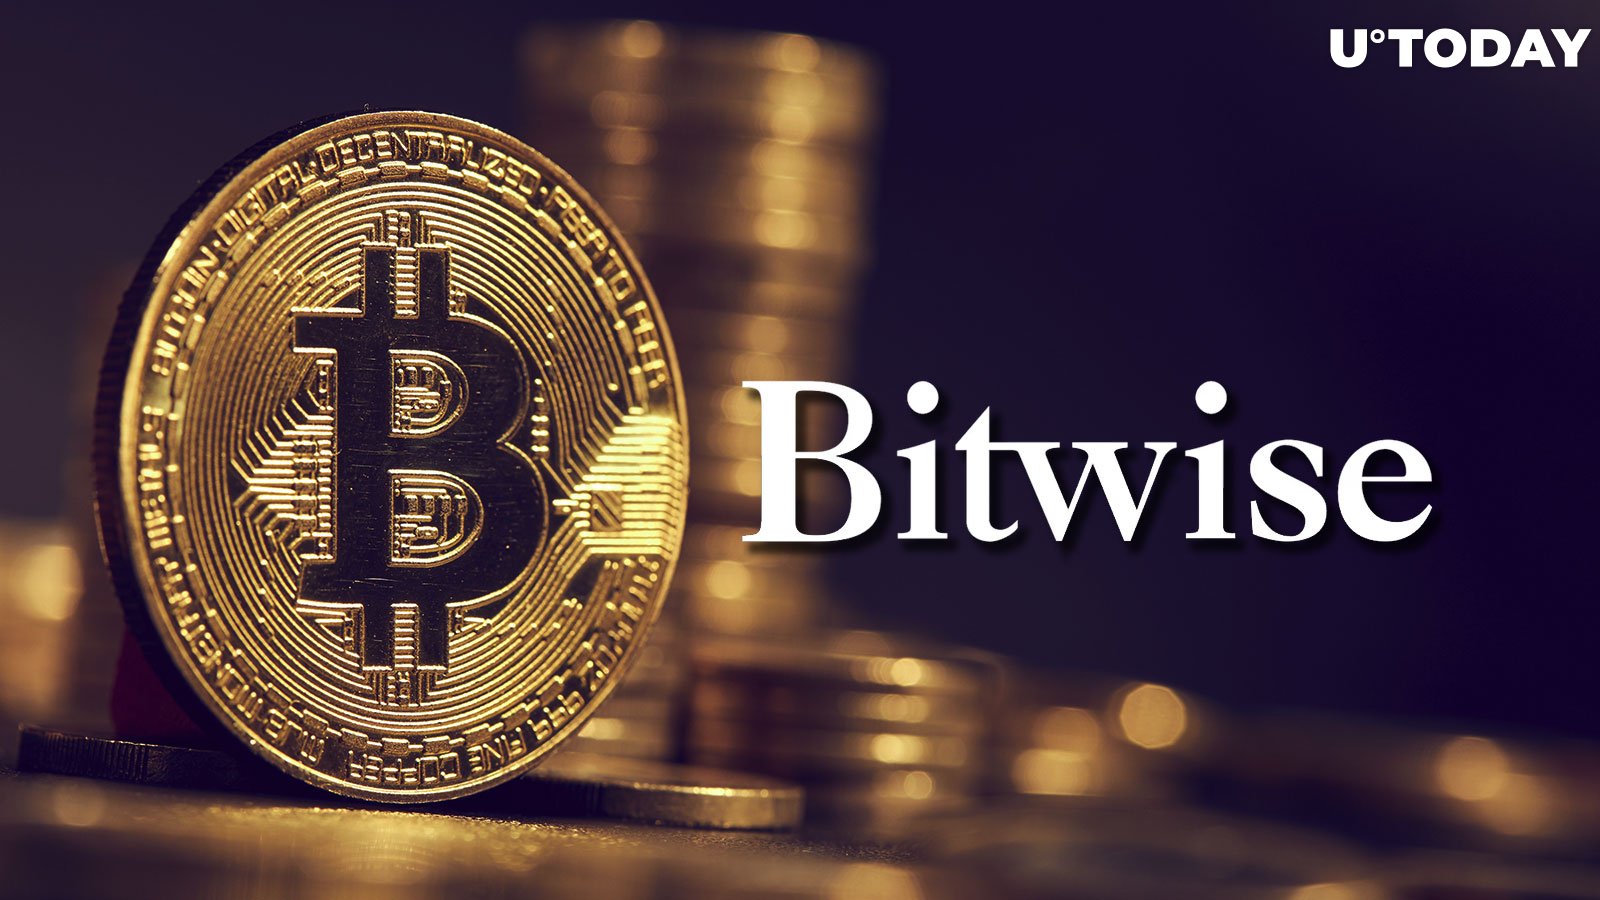 New Bitcoin Futures ETF Application Filed by Bitwise